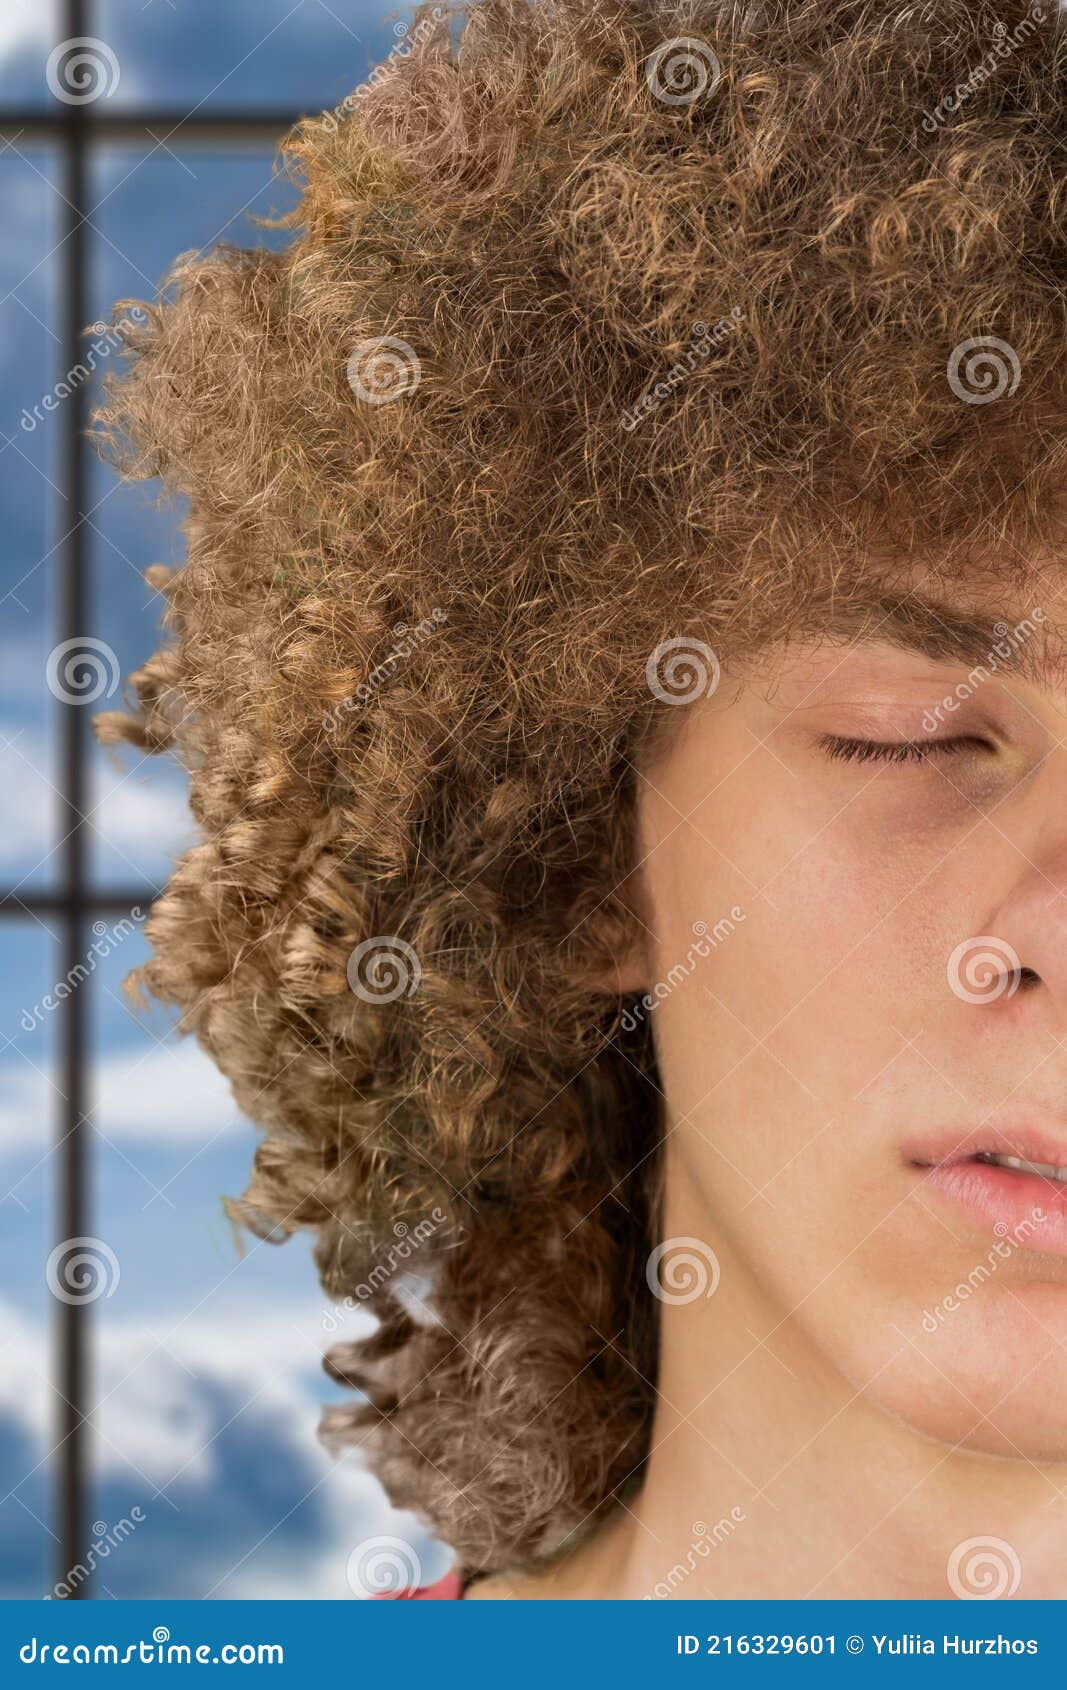 Splited in Half Cropped Portrait of a Young Curly European Man with Long  Curly Hair and Closed Eyes Close Up Against the Window. Stock Image - Image  of hairdo, hair: 216329601